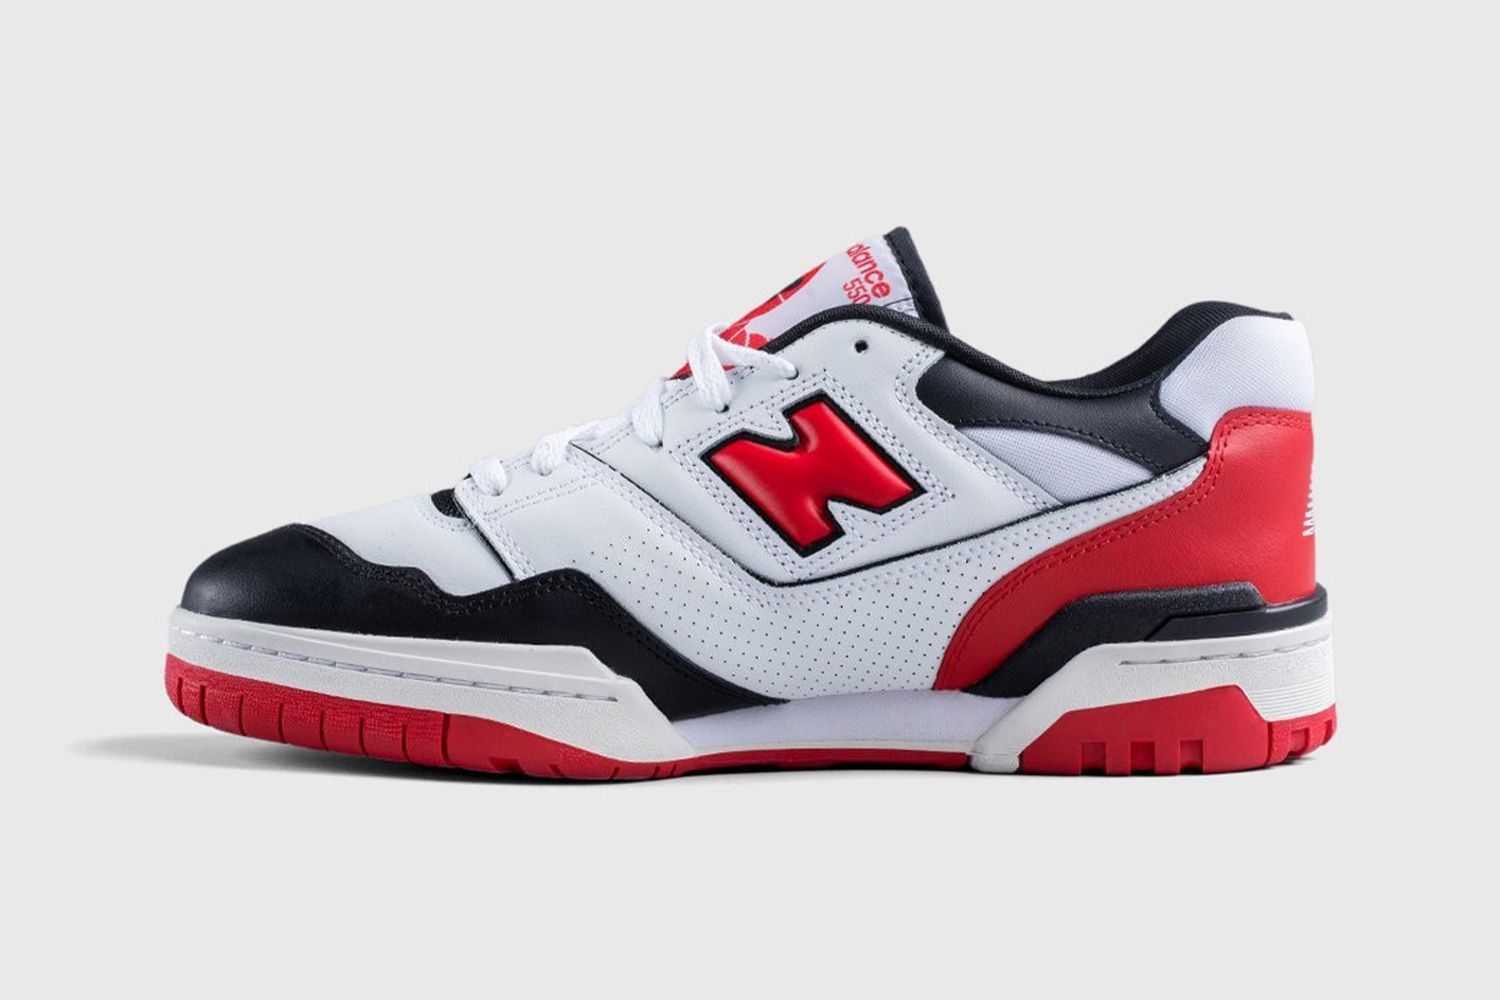 New Balance Finally Has a Competitor to the Air